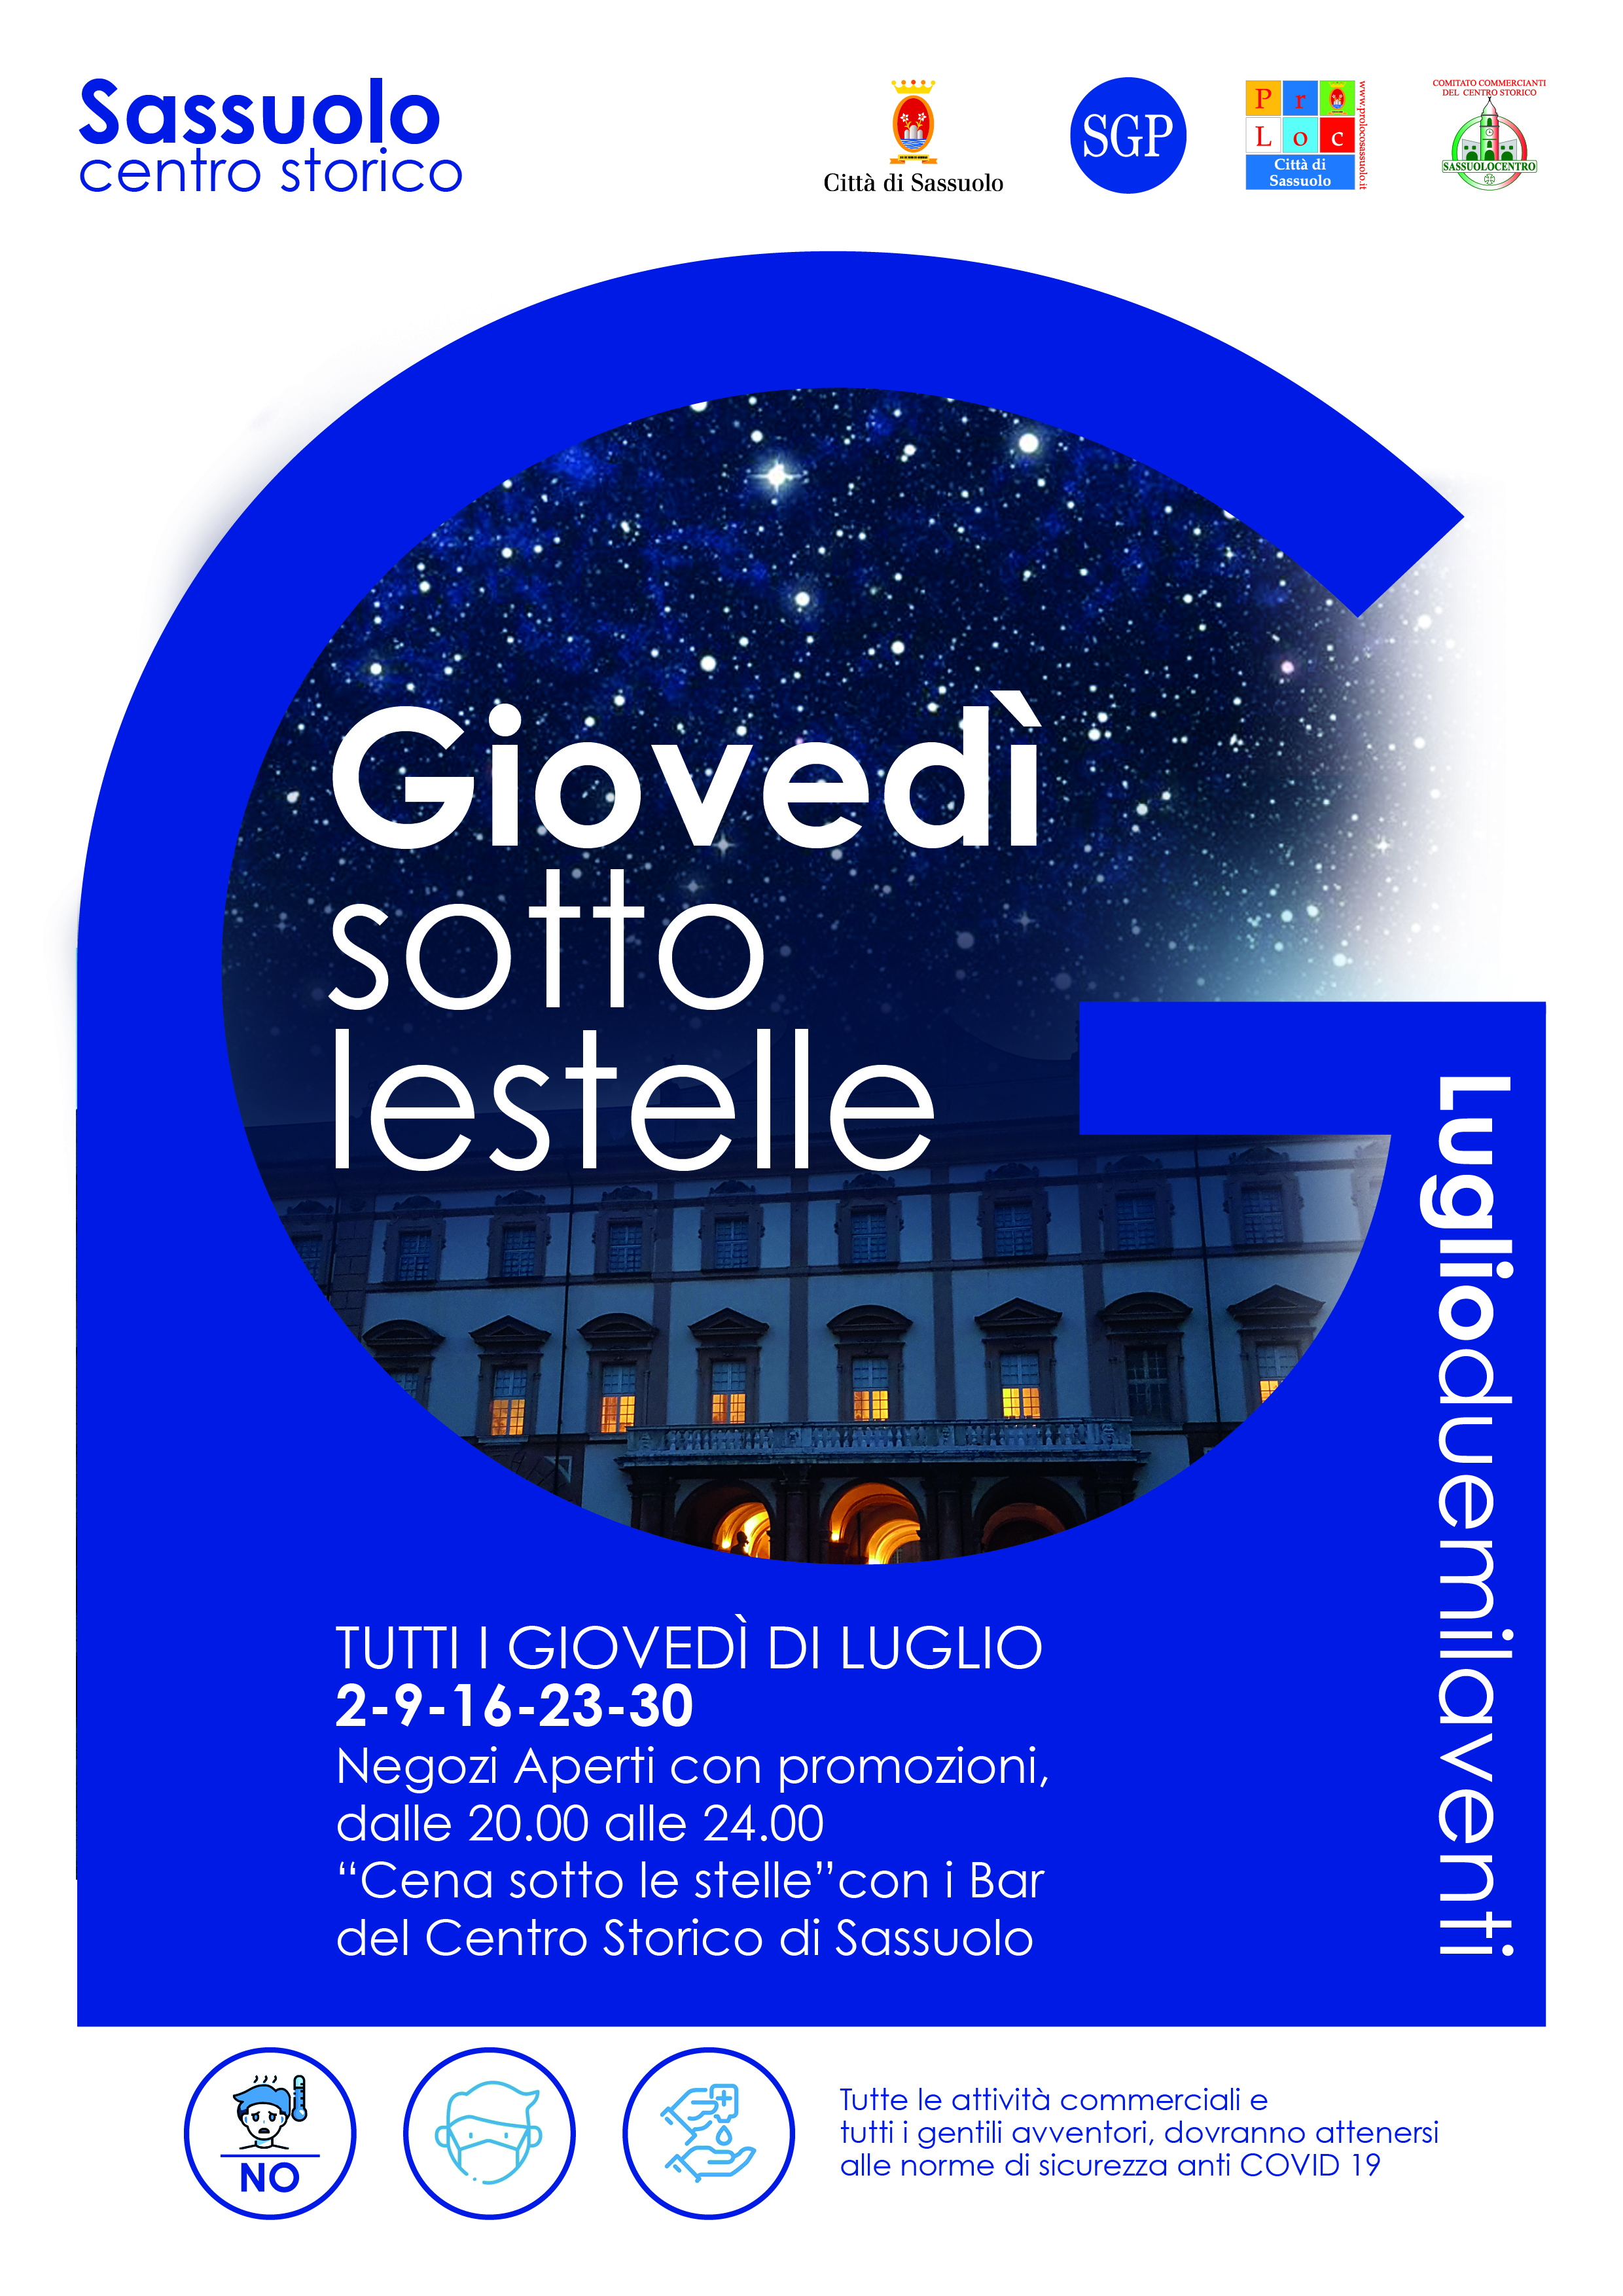 Giovedì sotto le stelle 2020